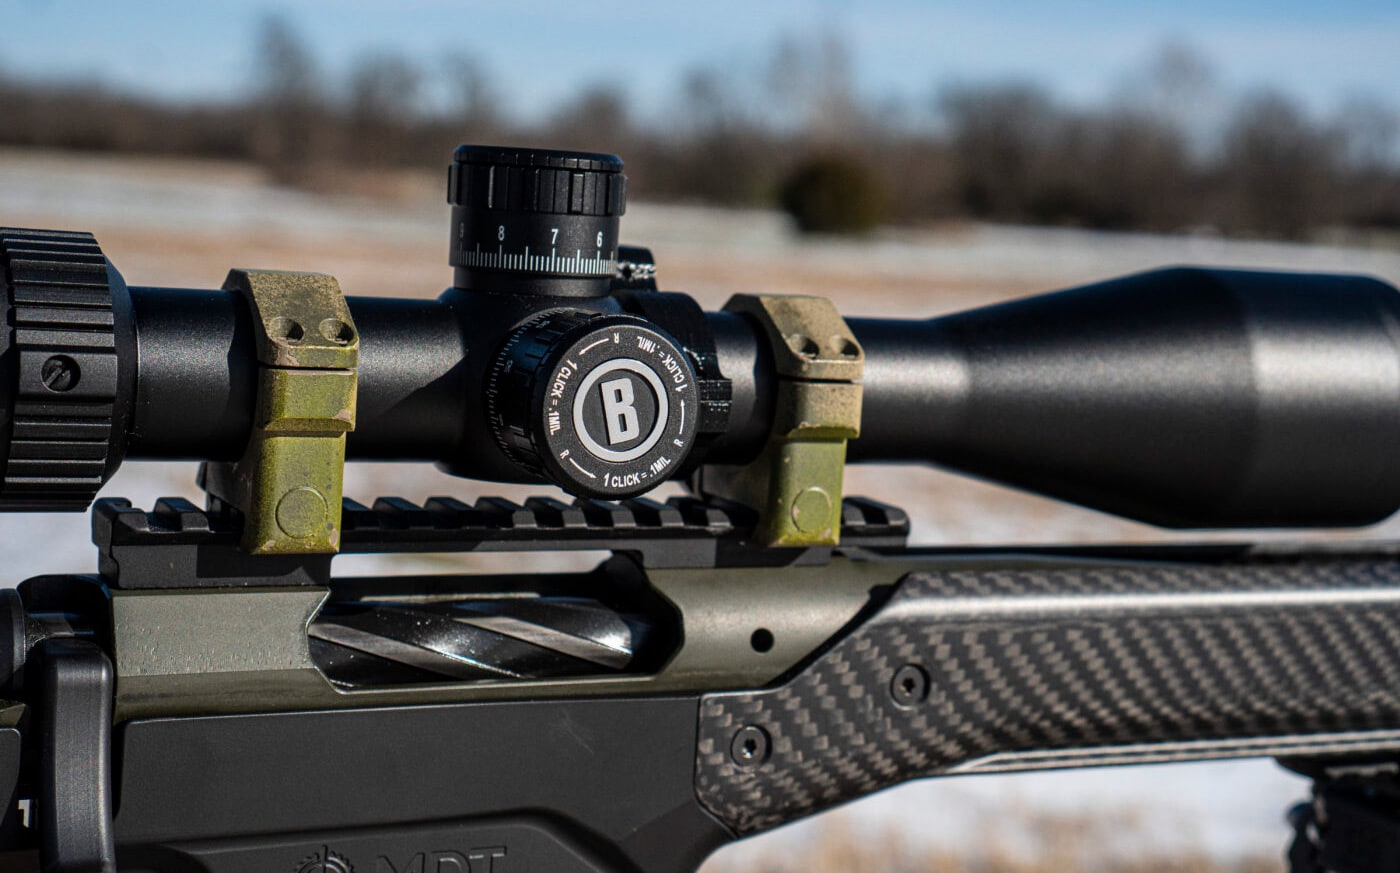 Detail of Bushnell Match Pro scope mounted to Waypoint rifle